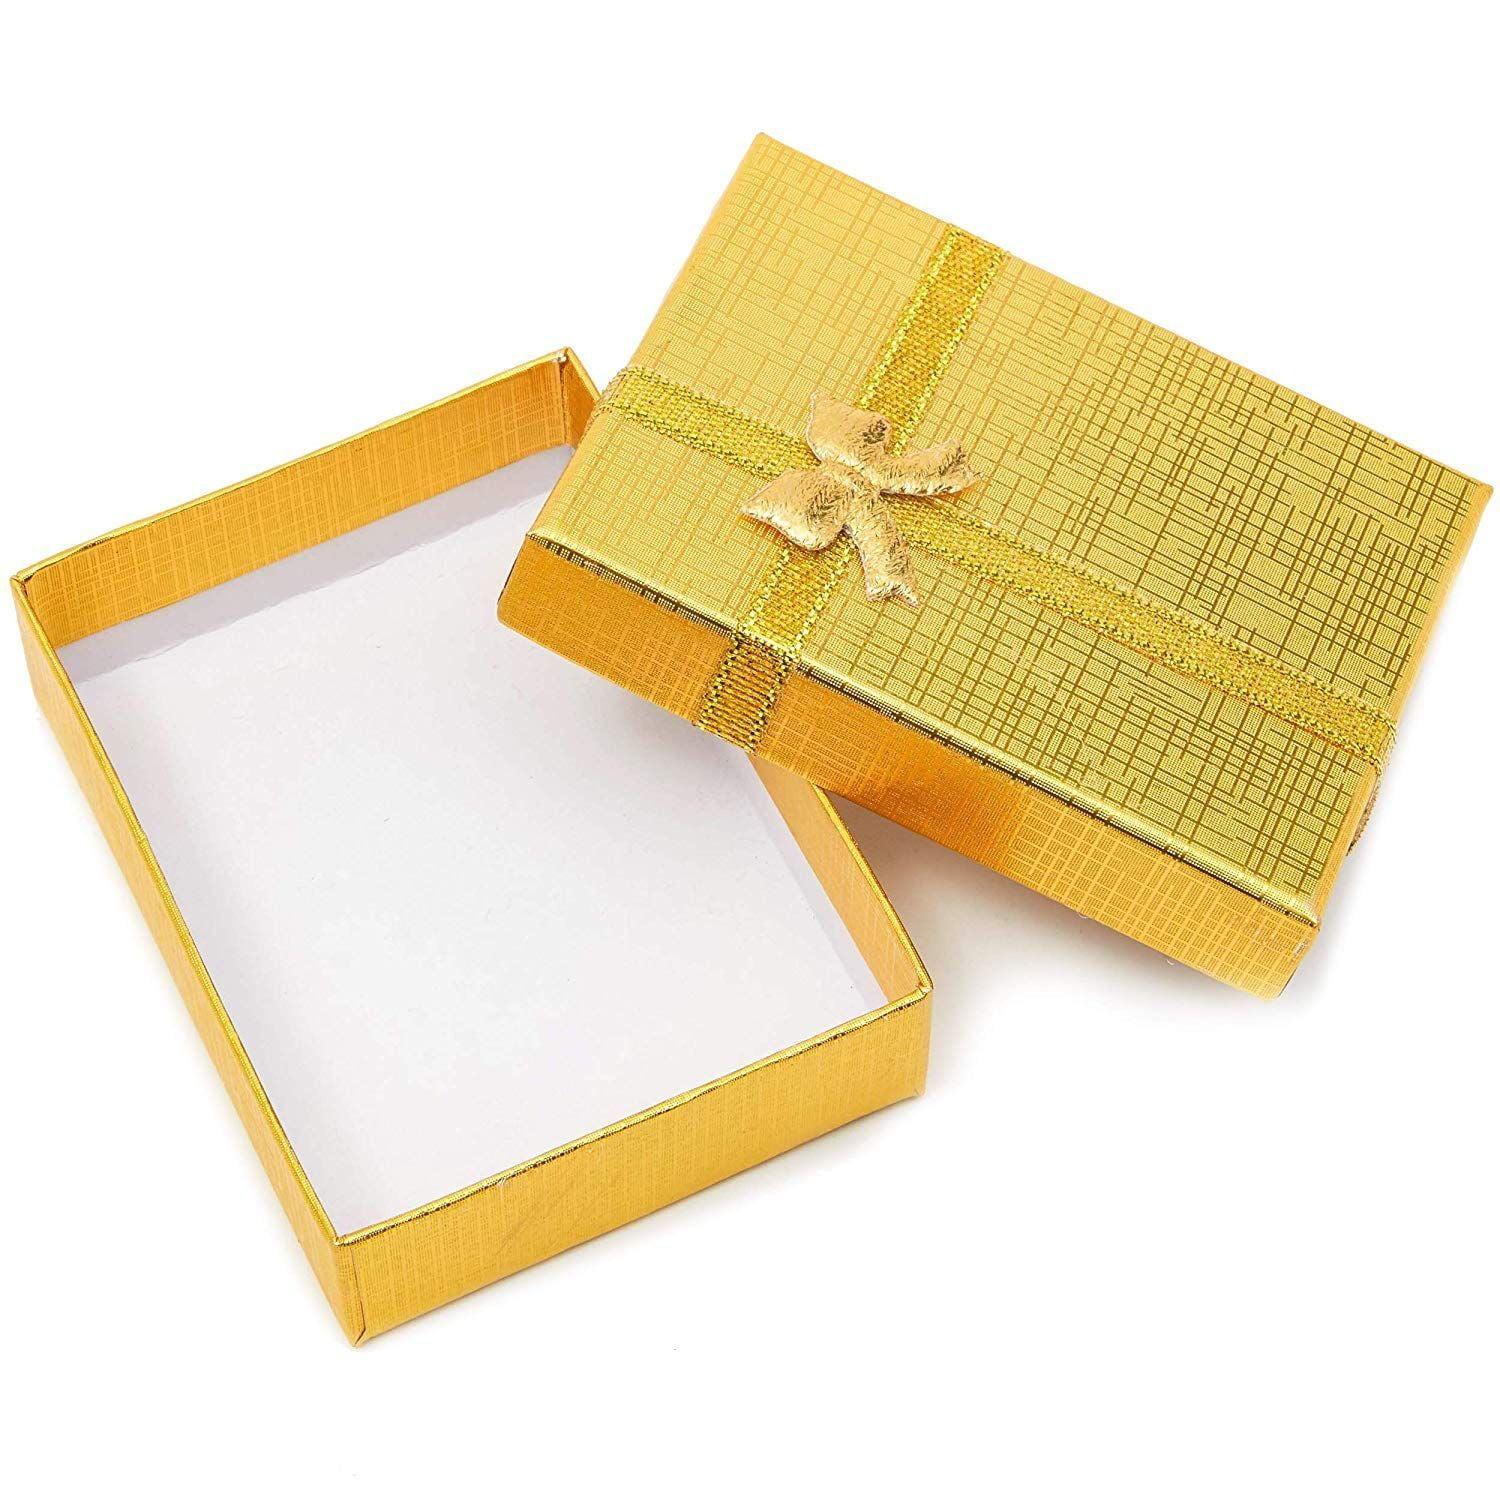 12x Paper Gift Box For Ring Earring Necklace Jewelry Storage Case with Bow-knot